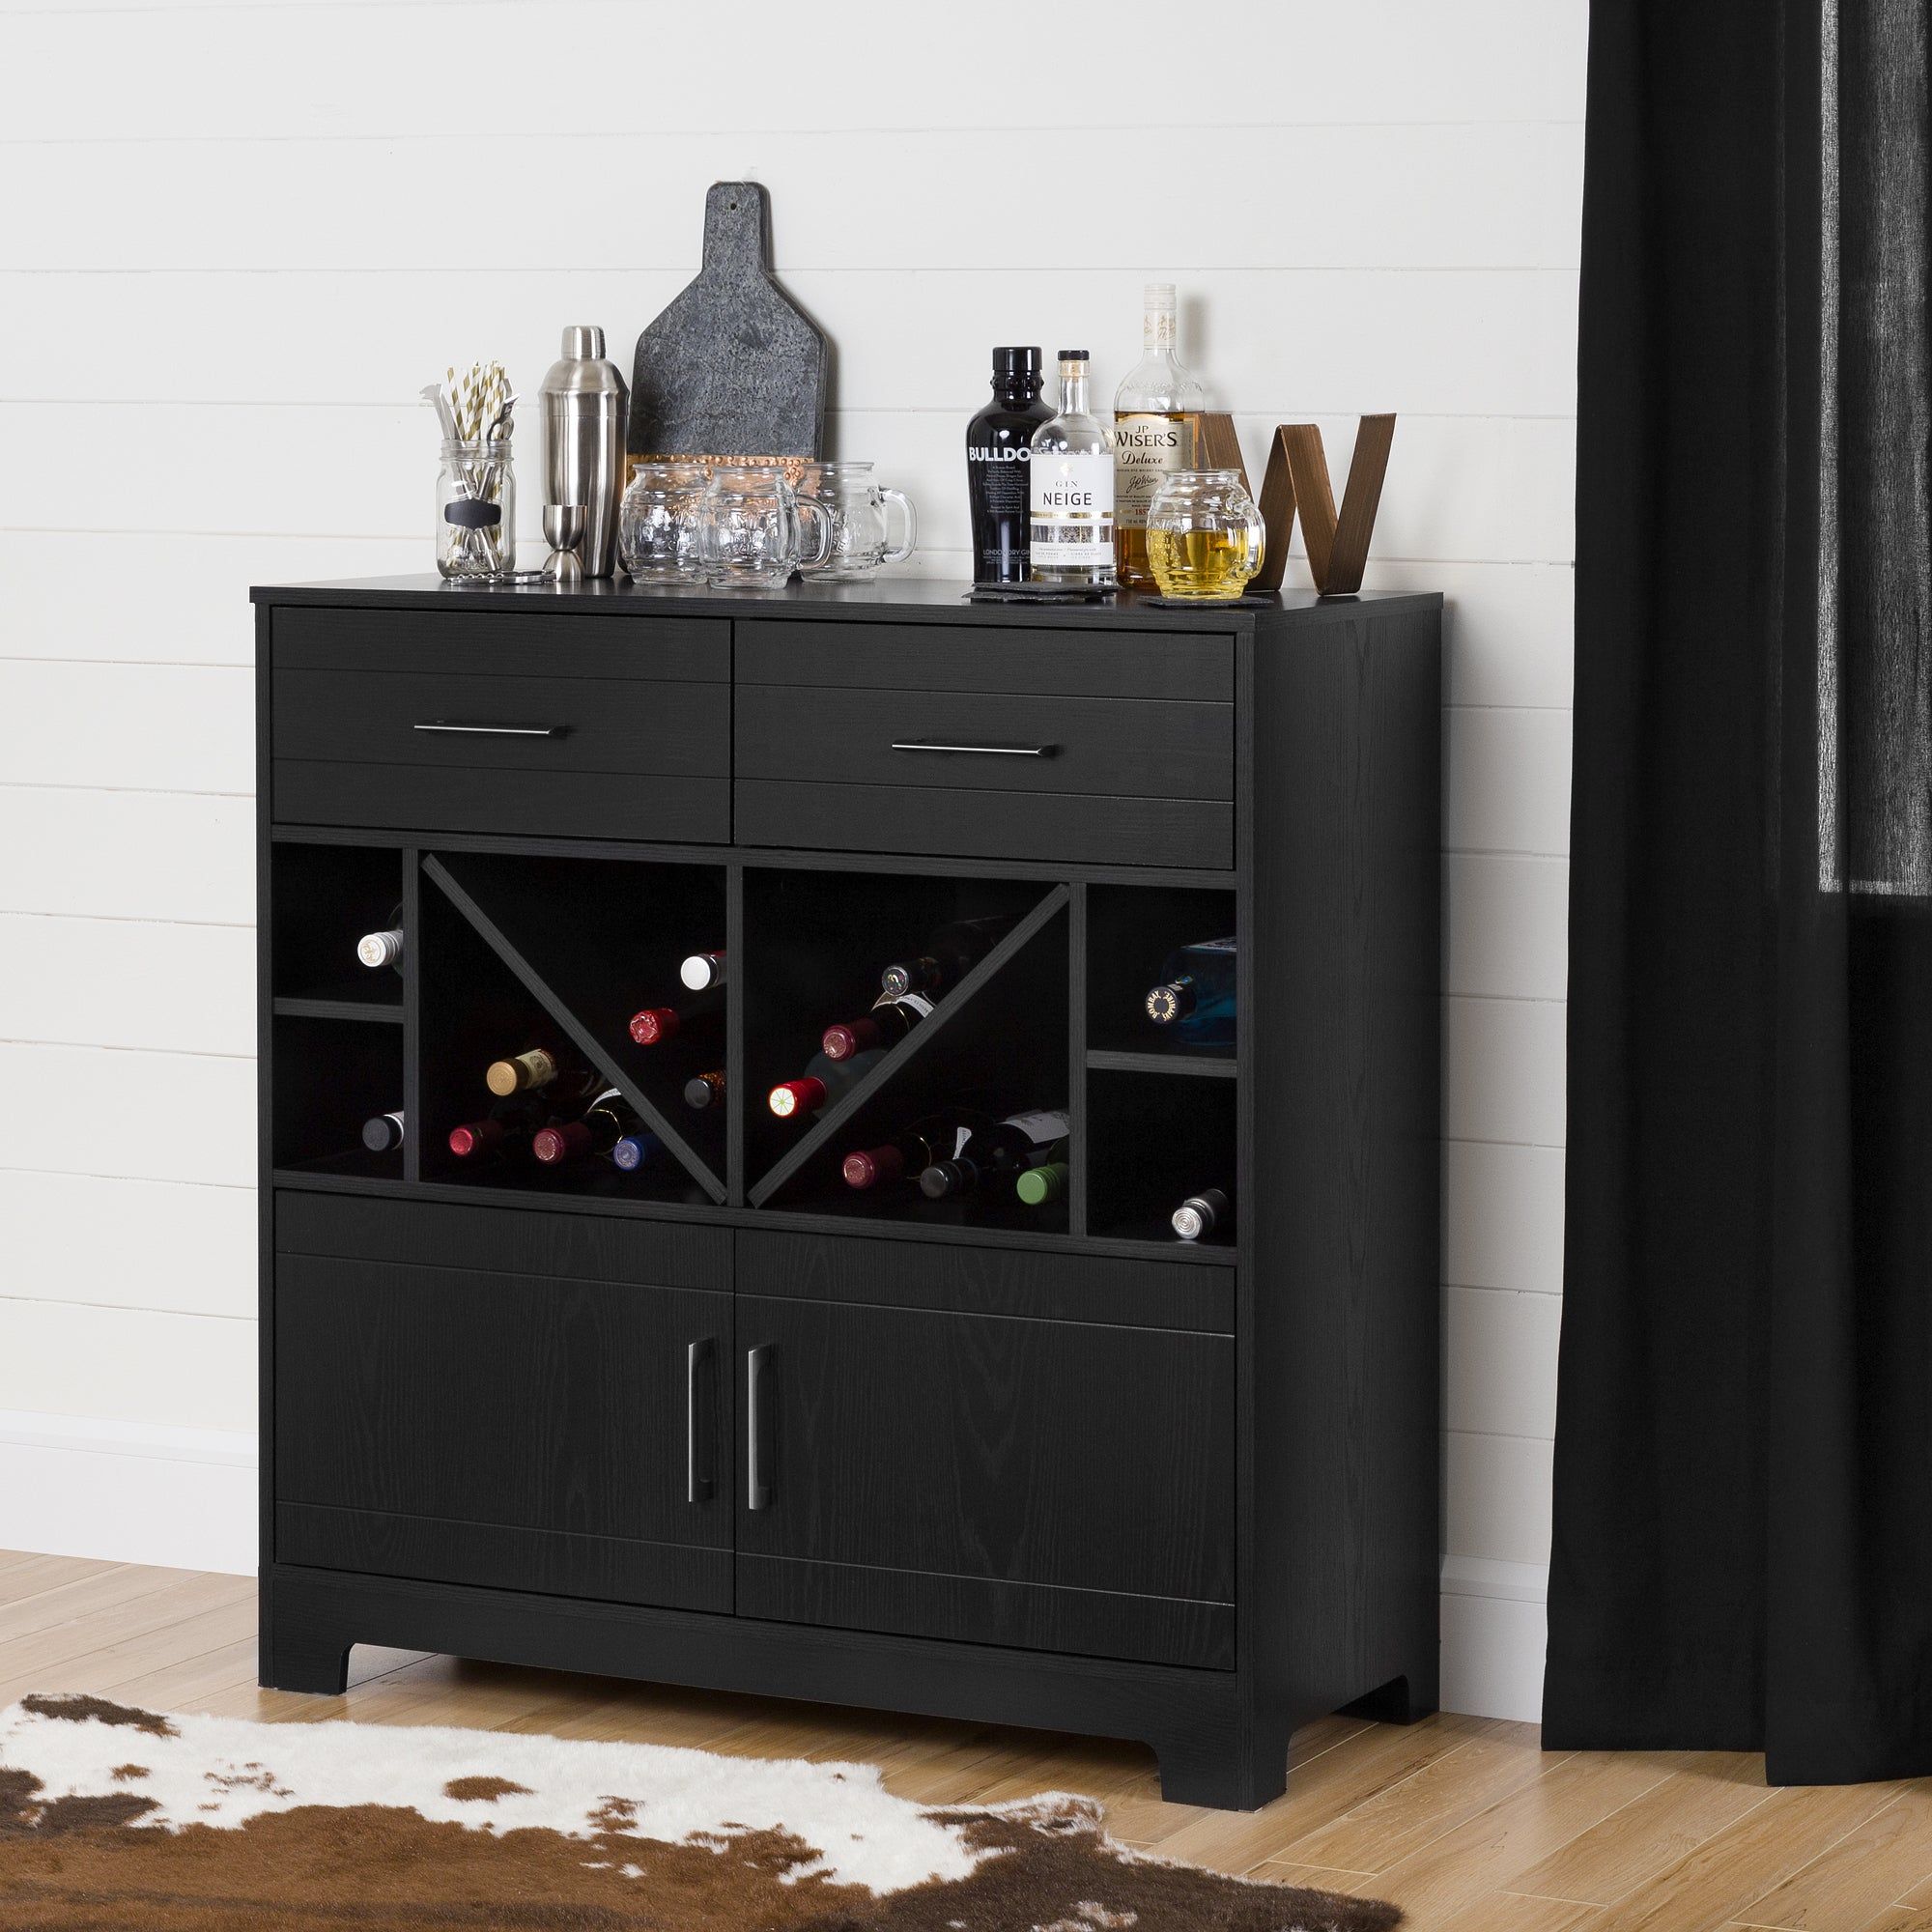 Buy Wine Bottle Storage South Shore Furniture Buffets Throughout Buffets With Bottle And Glass Storage (View 12 of 30)